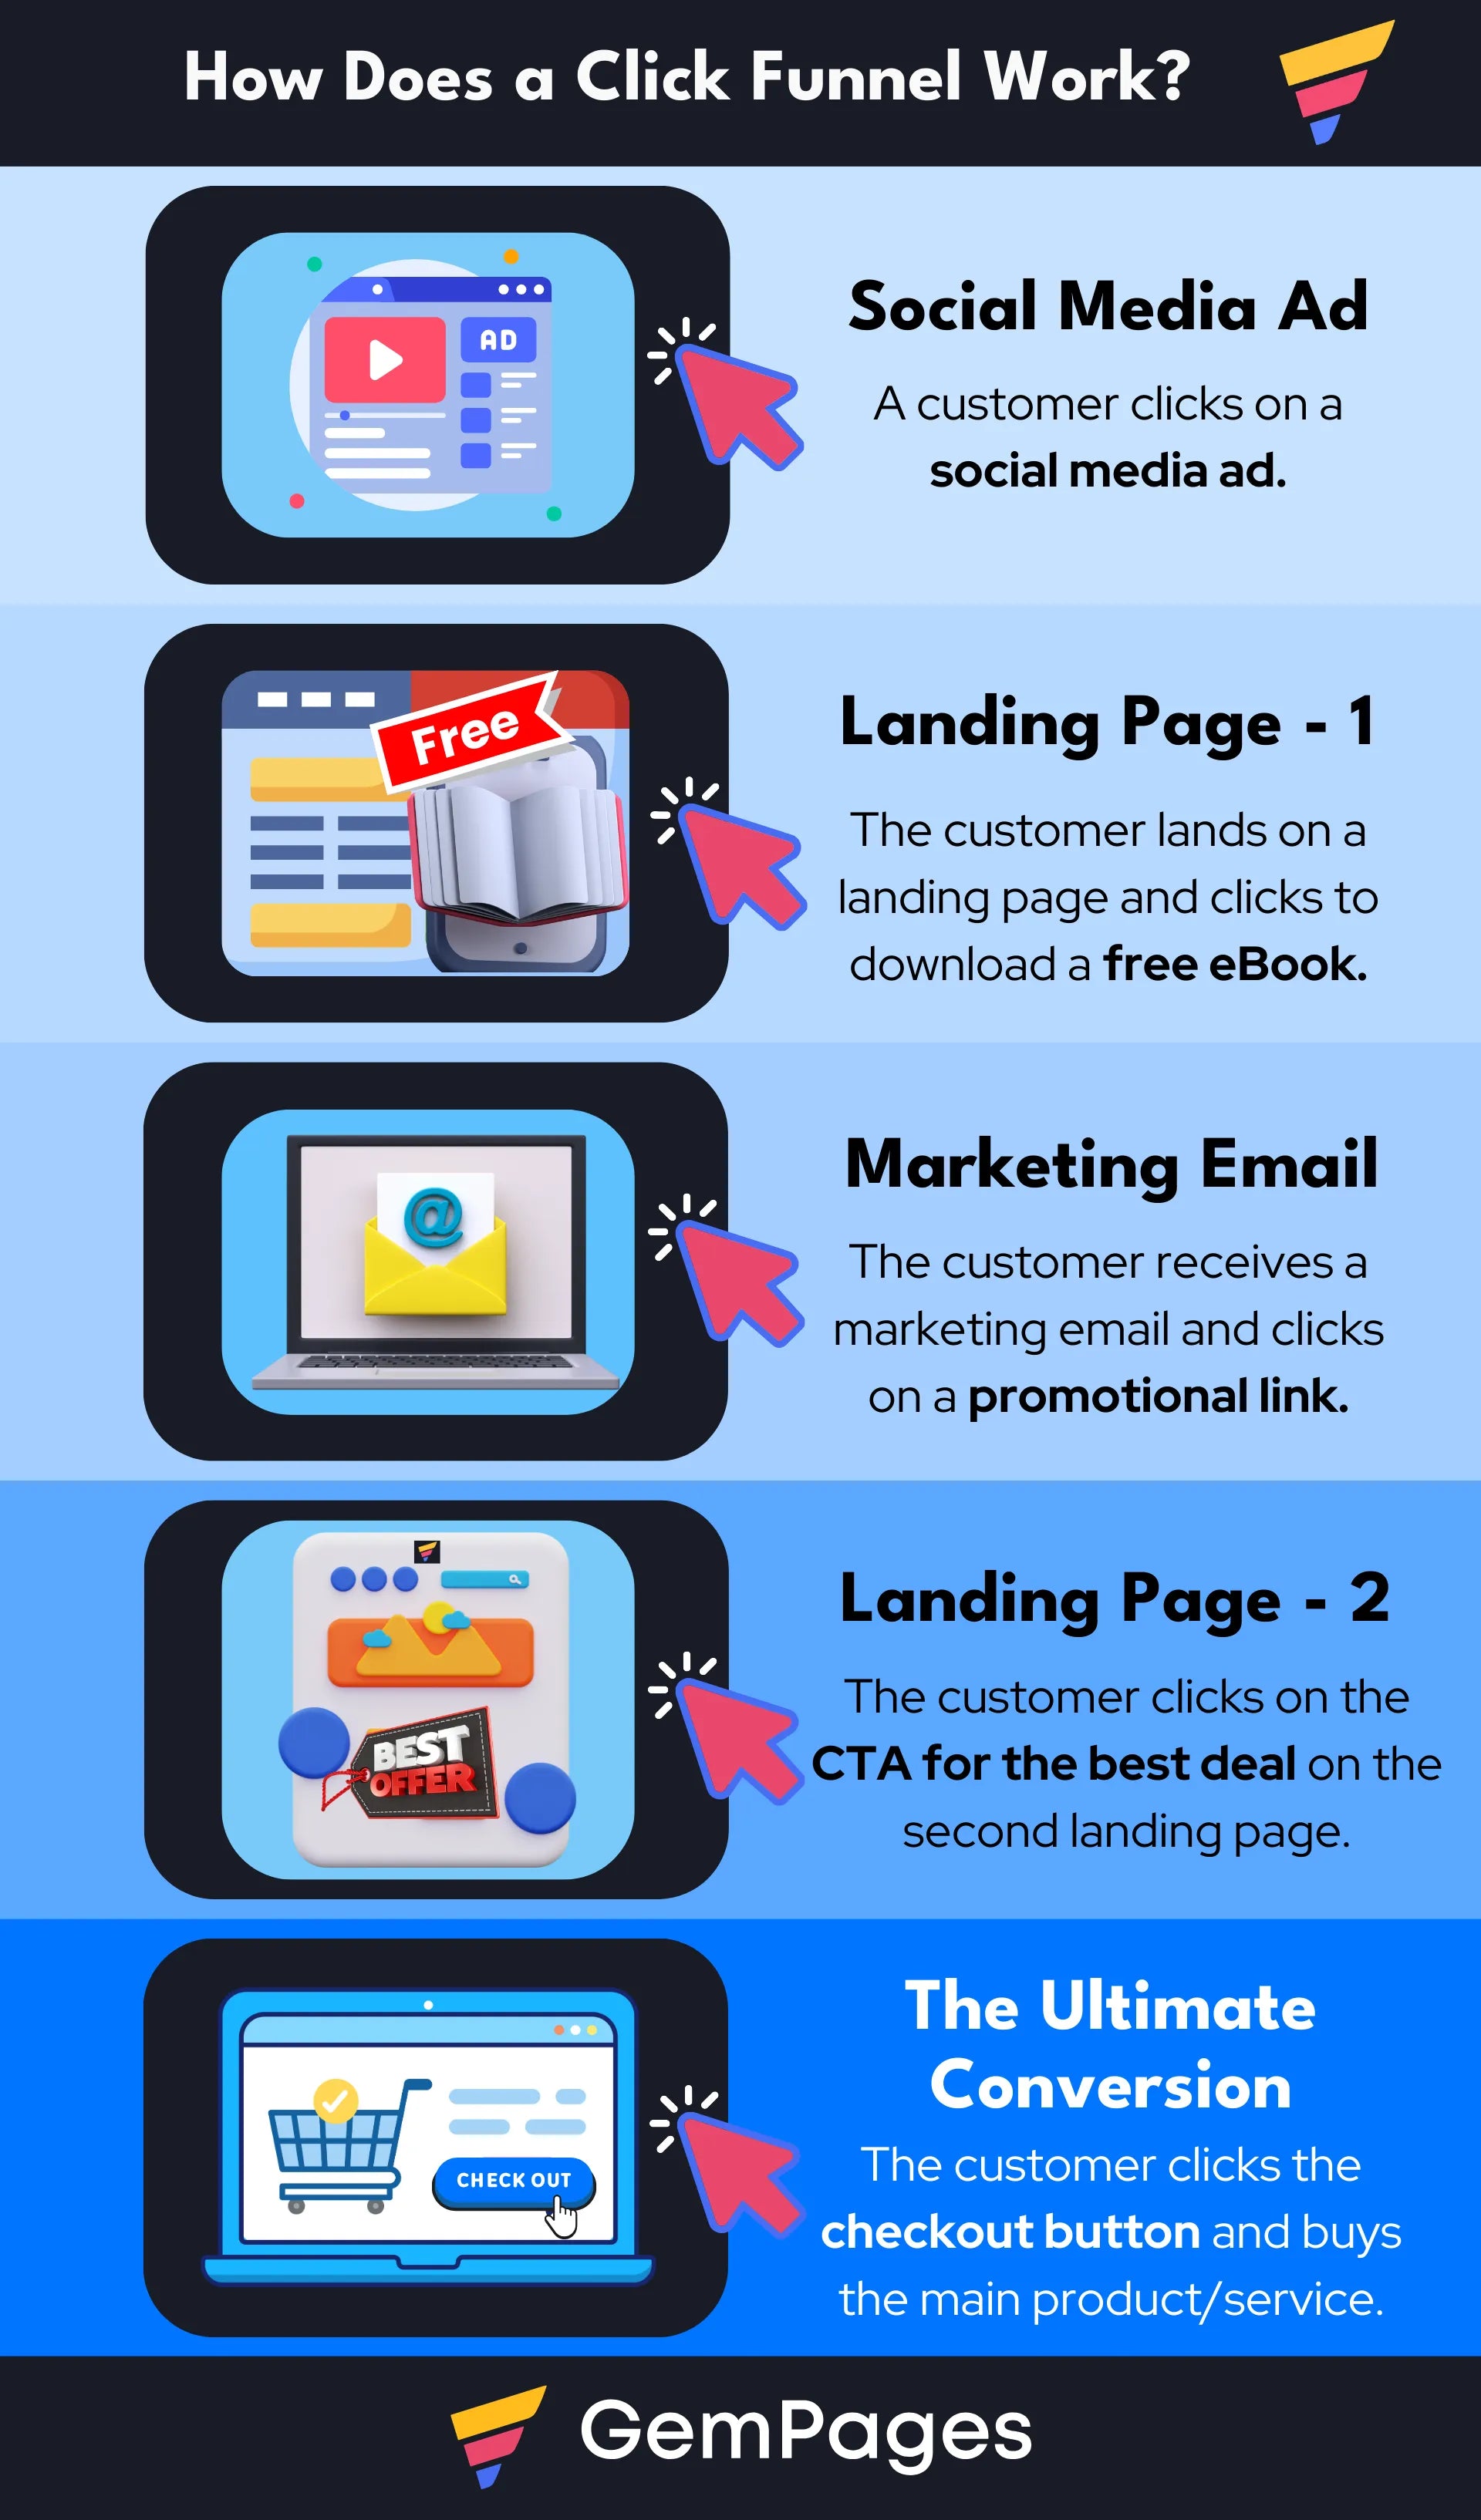 A graphical presentation explaining how a click funnel works